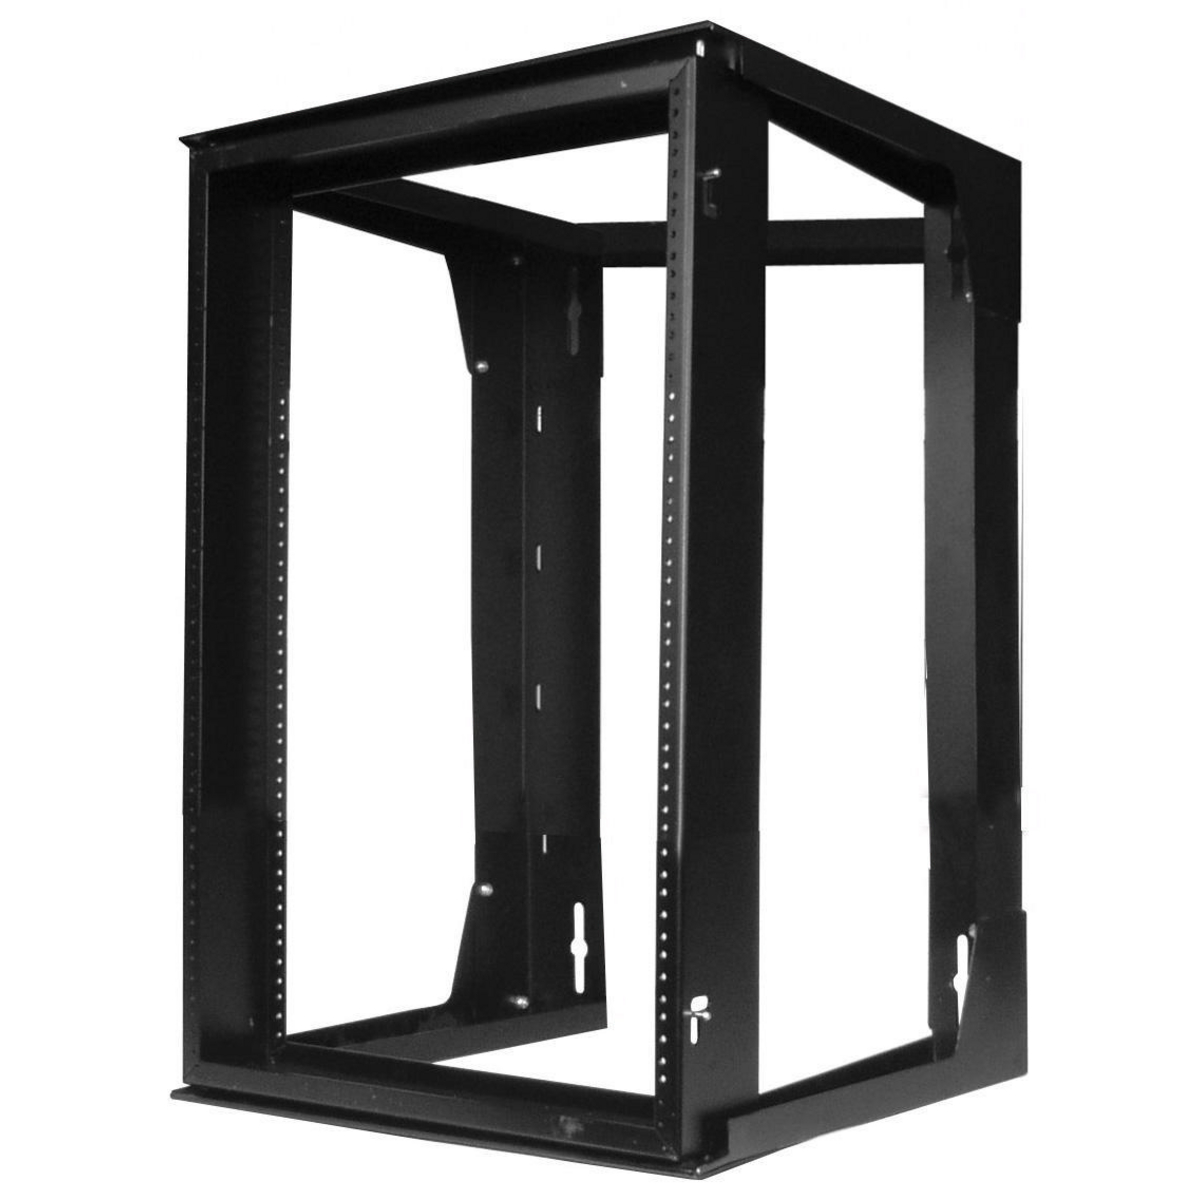 Rack, Cable Management Component, NEXTFRAME Wall Mount Swing Frame, 24 H,  Black, HPWWMR24